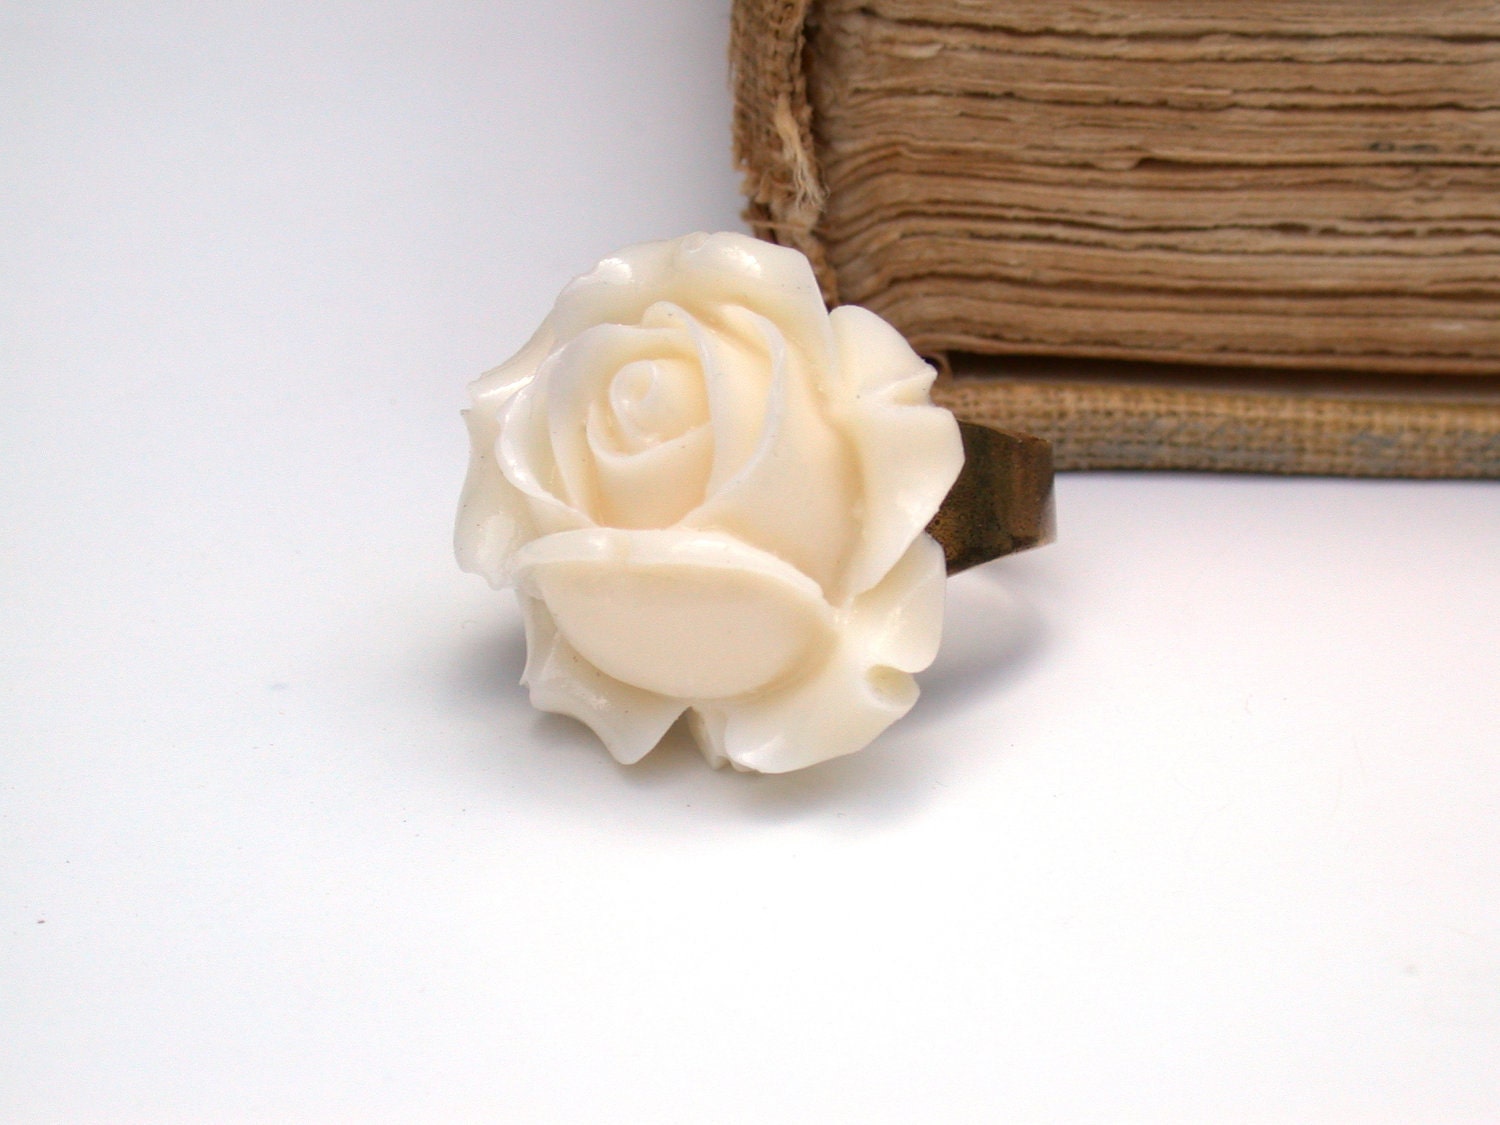 Vintage Ring With A Cream Color Rose